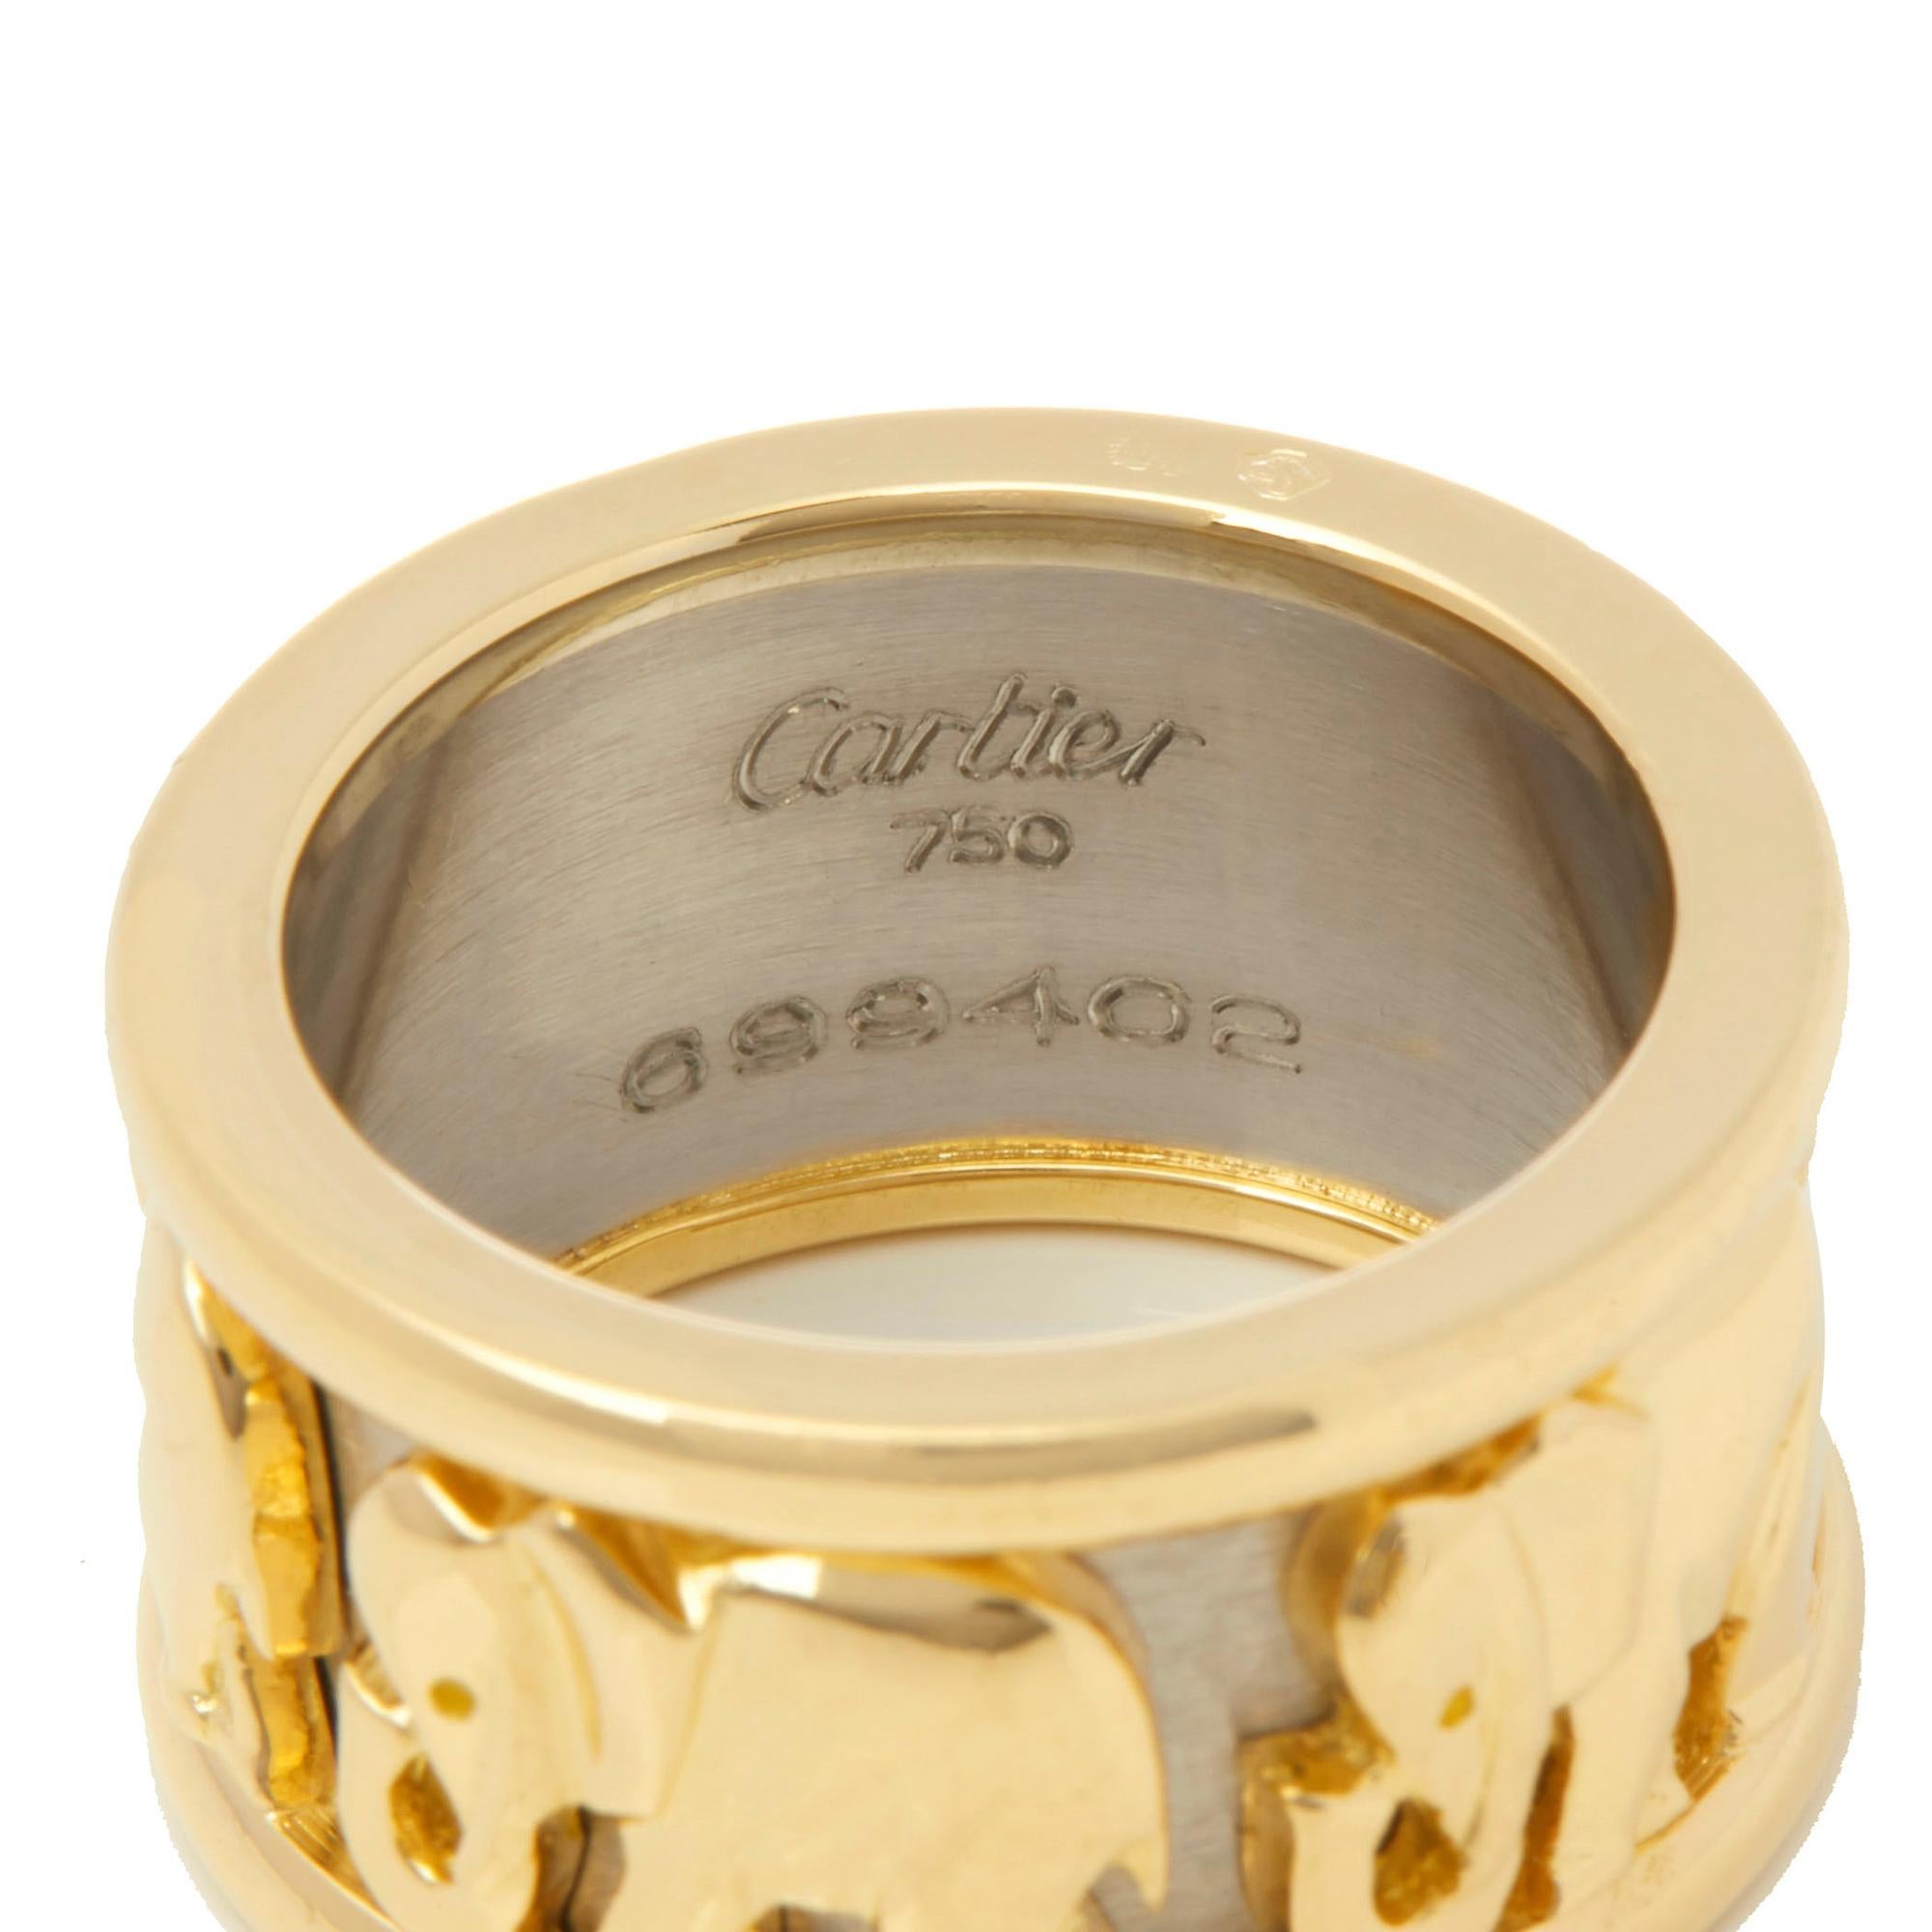 This Ring by Cartier is from their Pharaon collection and features an Elephant design, made in 18k White & Yellow Gold. The Ring sizes are UK L, EU 52 and US 5 3/4 and a band width of 1.1cm. This Ring cannot be re-sized. The total weight is 16.20